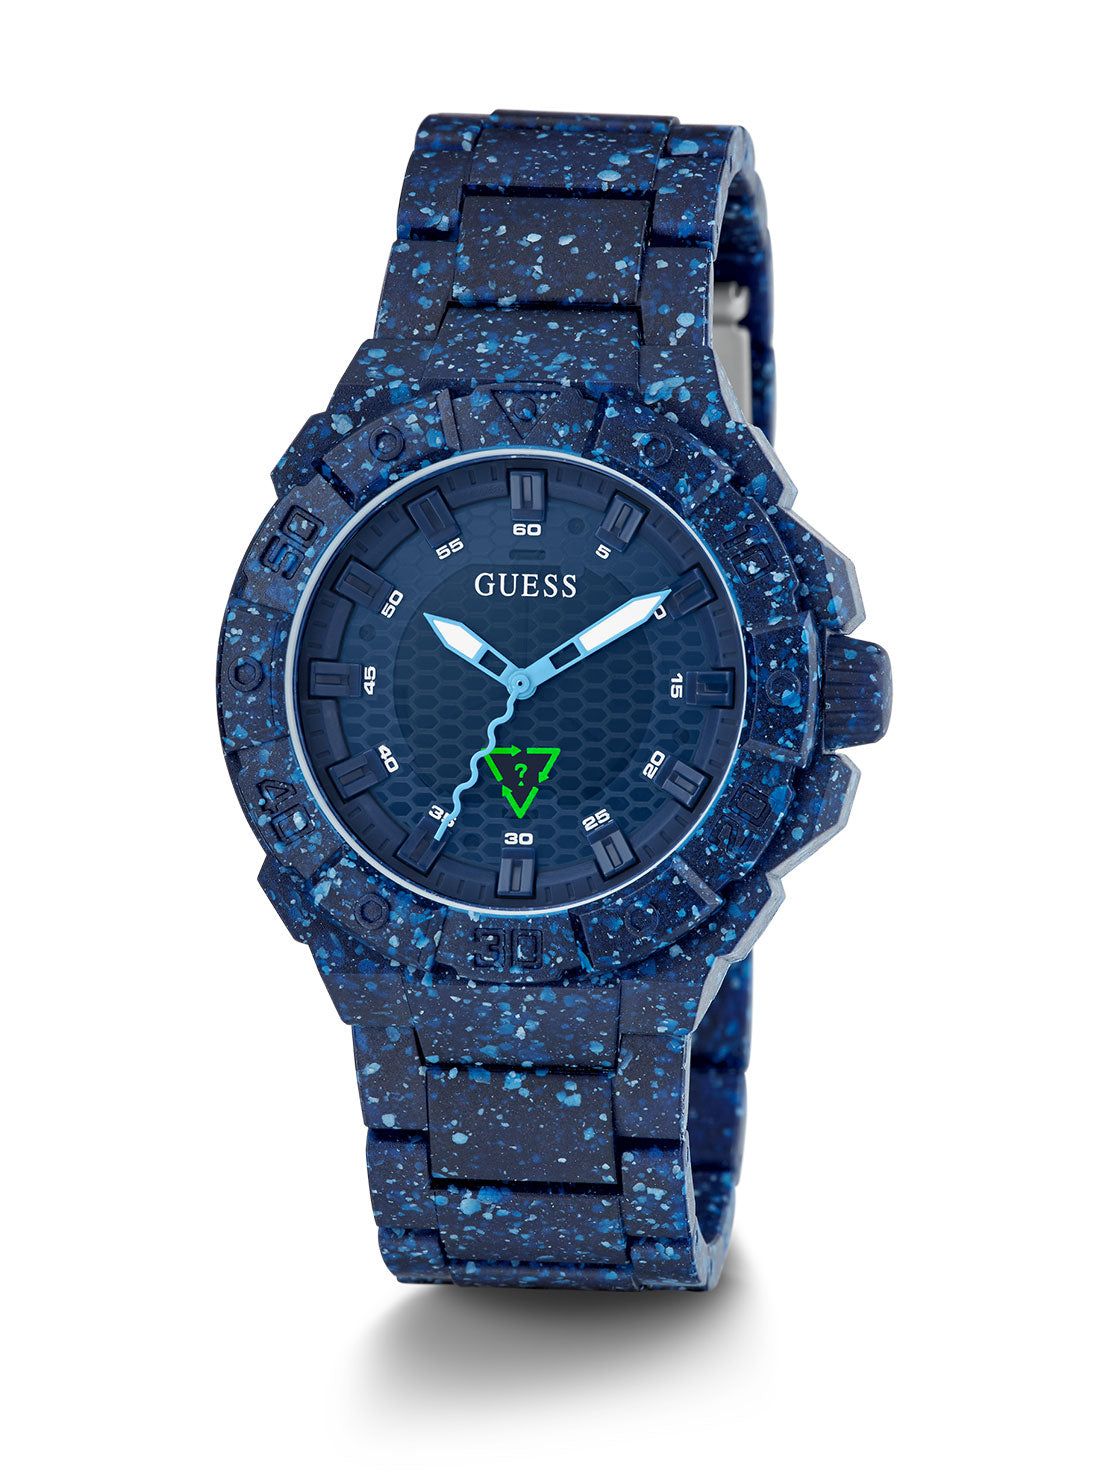 GUESS Women's Blue Pacific Oceans Watch GW0507G1 Front Side View